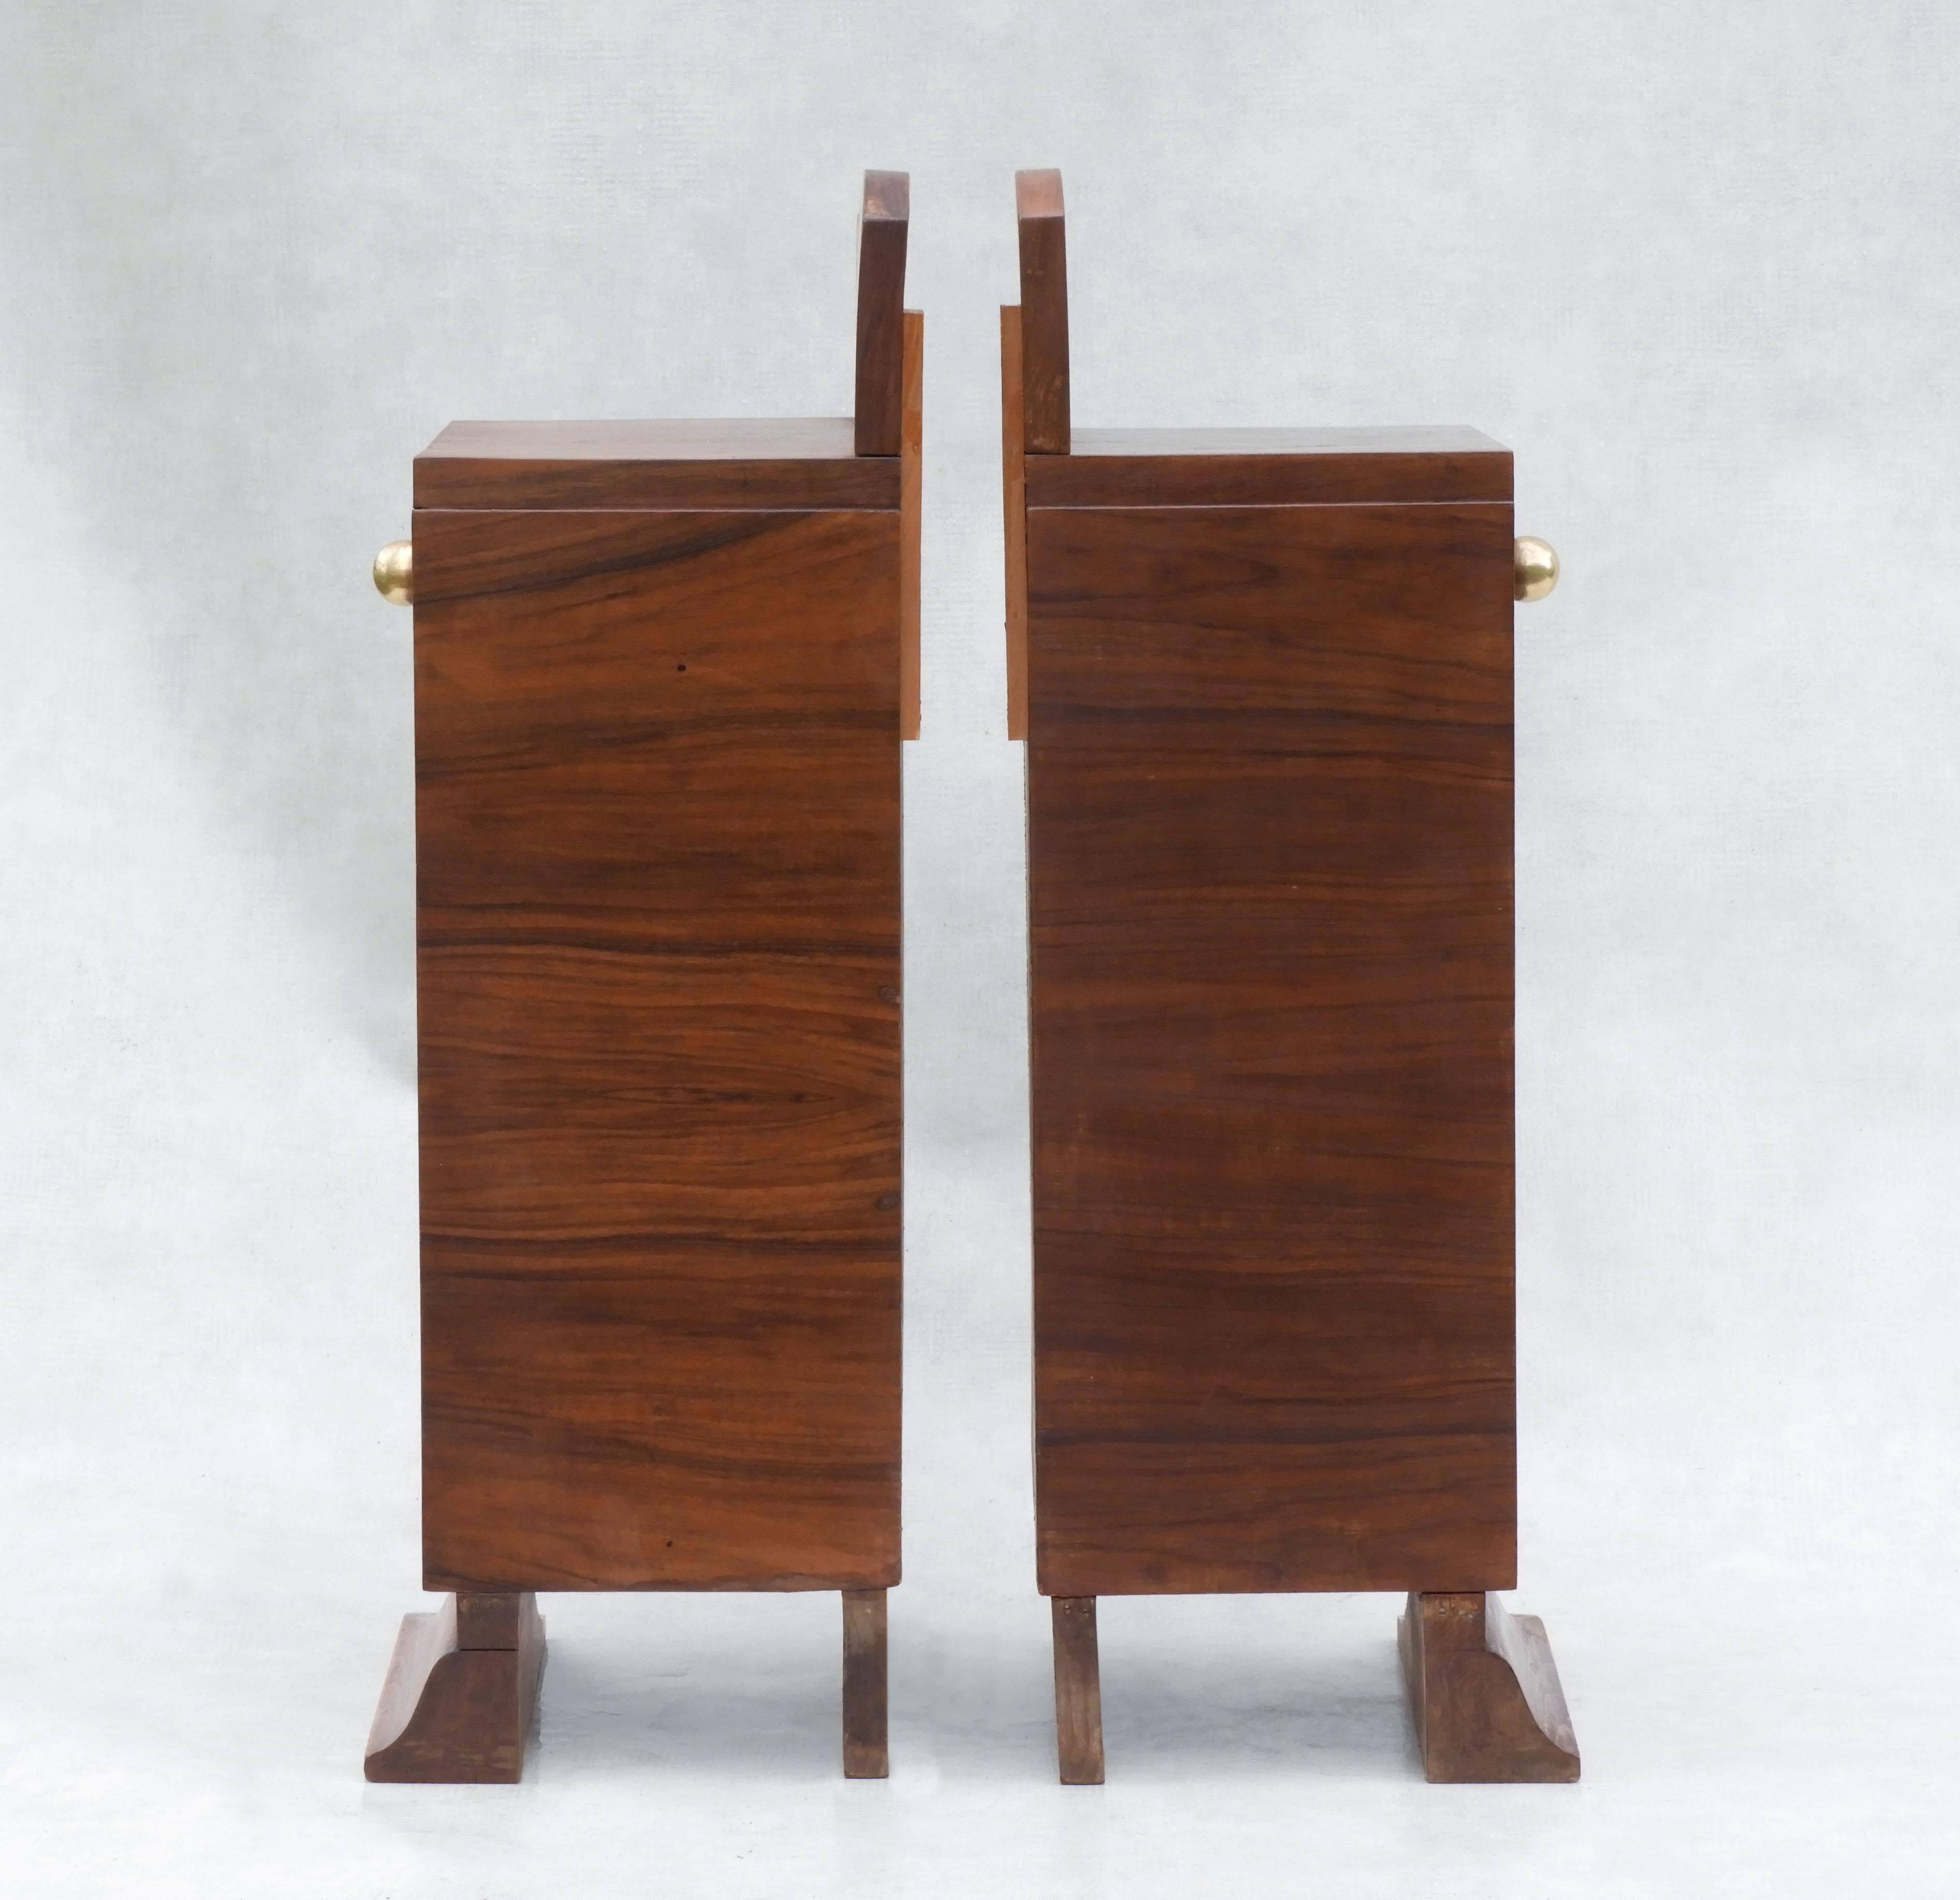 Pair of Art Deco Nightstands, Side Cabinets or Sofa End Tables, C1930s France For Sale 1